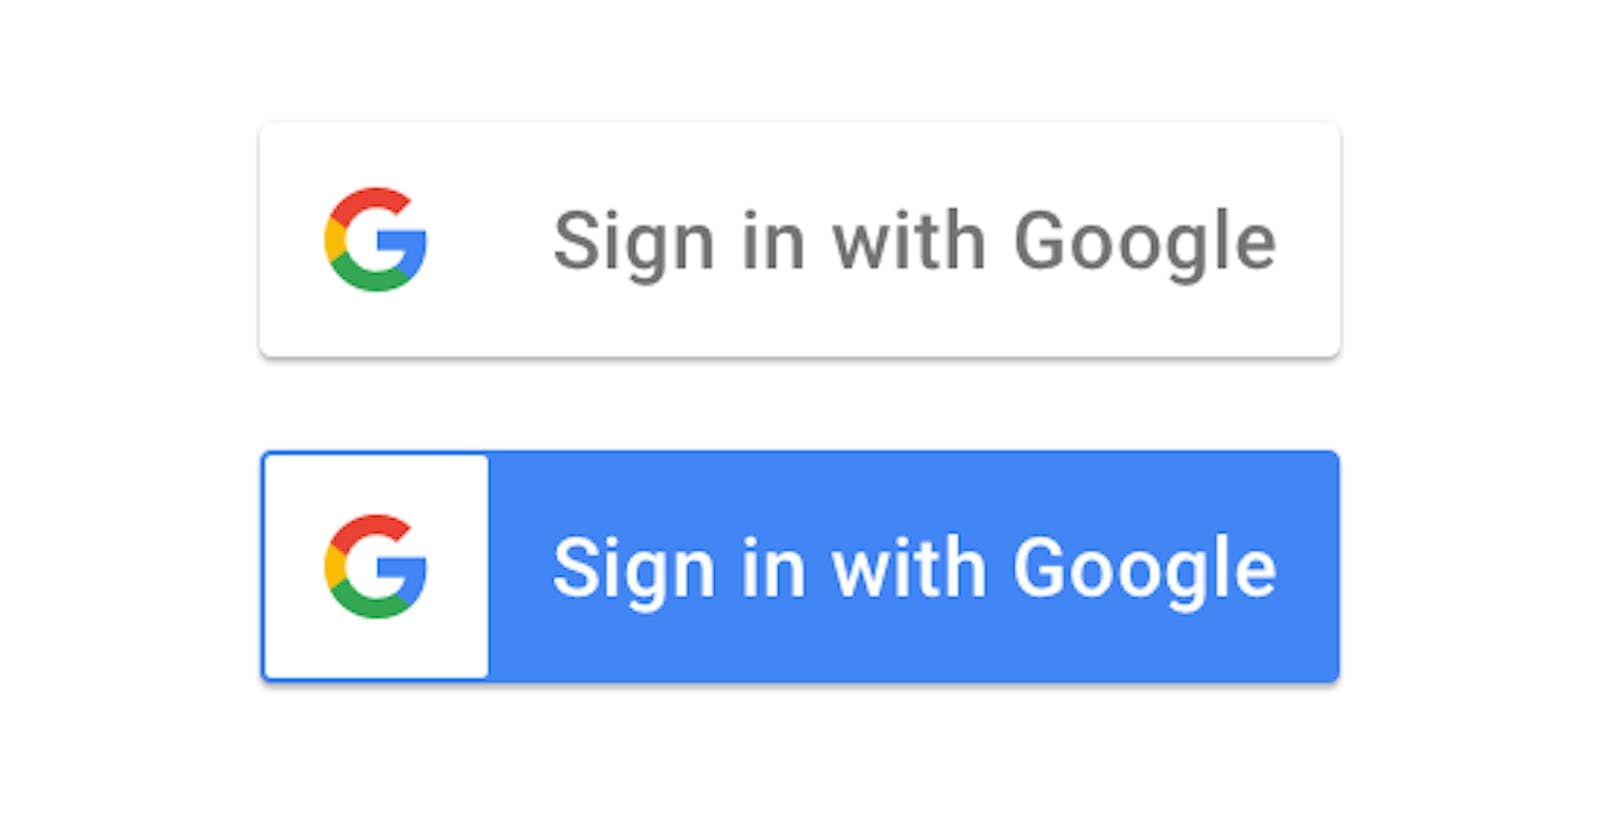 Implementing Sign In with Google in NodeJS (without third-party libraries)